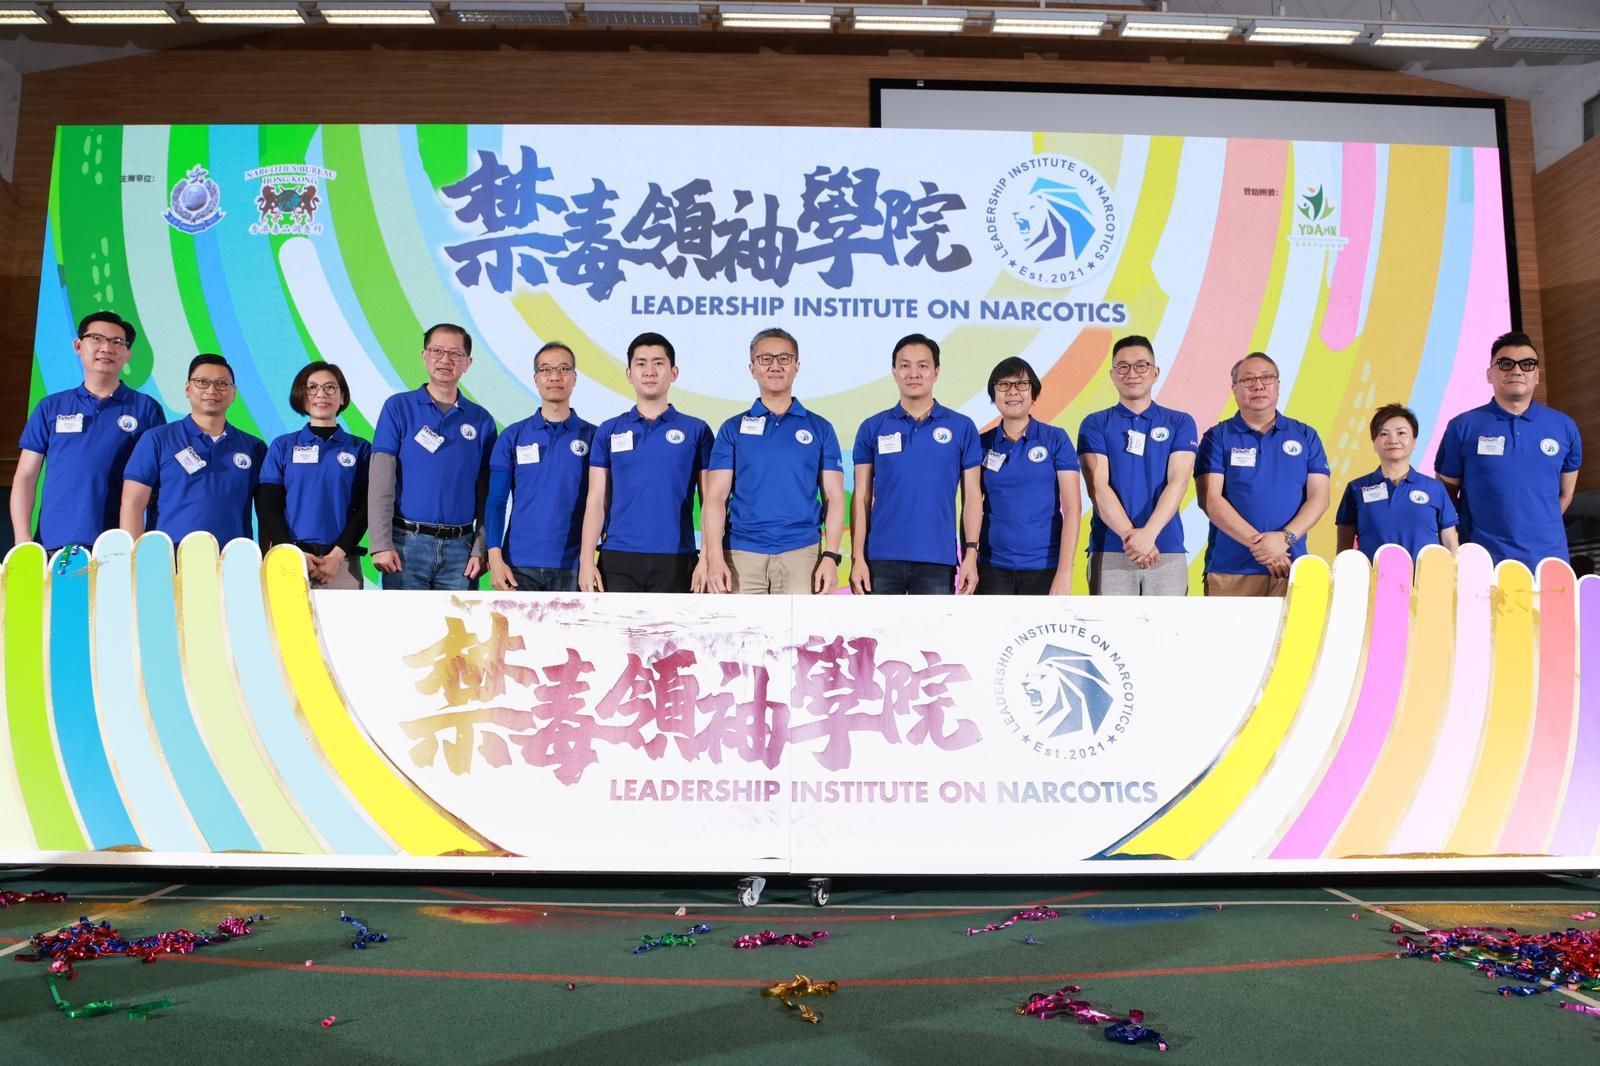 The Hong Kong Police Force today (April 1) launched the second Leadership Institute on Narcotics (L.I.O.N.), the one-year anti-drug youth leadership development programme. Photo shows (from left) Executive Committee Member of L.I.O.N, Mr Stephen Cheung; Executive Committee Member of L.I.O.N, Mr Barry Cheung; the Chief Superintendent of Narcotics Bureau, Ms Ng Wing-sze; the President of L.I.O.N, Mr Henry Tong; the Director of Crime and Security, Mr Yip Wan-lung; the Chairman of Hong Kong Youth Development Alliance, Mr Lau Kan-sum; the Commissioner of Police, Mr Siu Chak-yee; the Chief President of L.I.O.N, Mr Leslie Choy; the Assistant Commissioner of Police (Crime), Ms Chung Wing-man; Vice-president of L.I.O.N, Mr Godfrey Ngai; Vice-president of L.I.O.N, Mr Kerry Wong; Executive Committee Member of L.I.O.N, Mrs Bally Wong and Executive Committee Member of L.I.O.N Mr Jackie Fung, officiating at the kick-off ceremony.